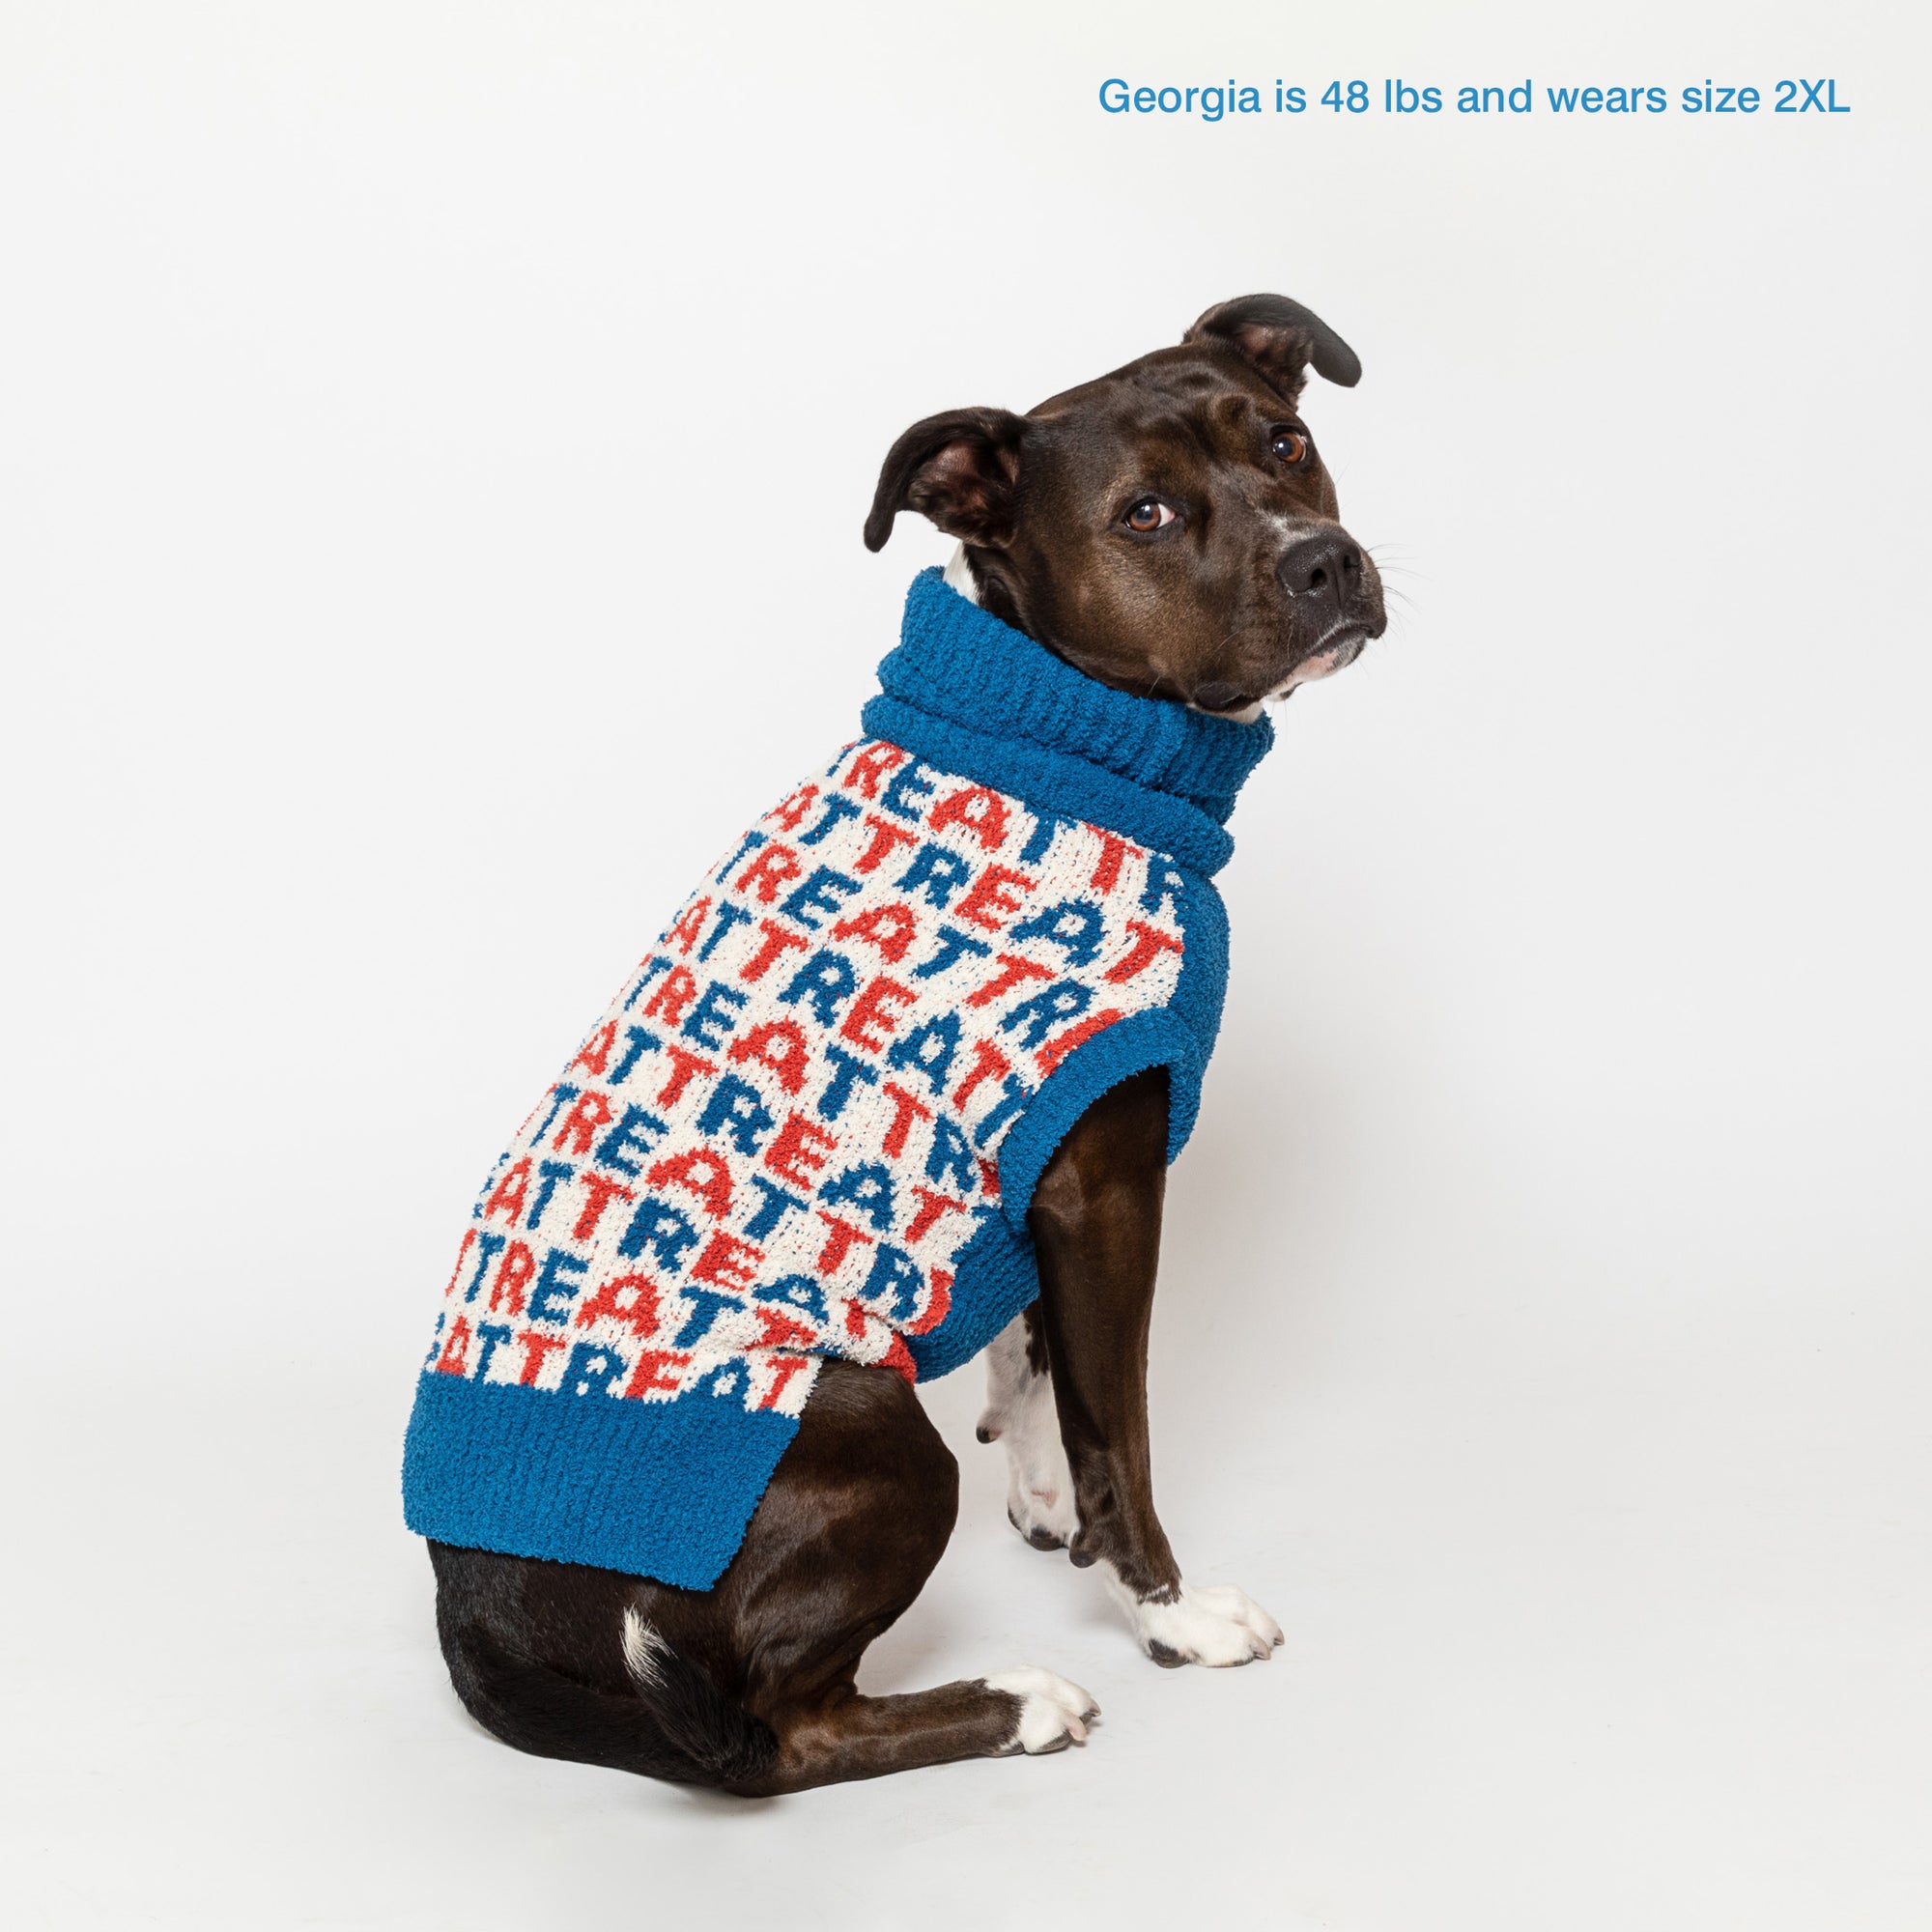 Georgia, a charming 48-pound dog, looks back over her shoulder while dressed in a cozy blue turtleneck sweater featuring a whimsical white and red "Treat" pattern, designed to fit her comfortably in size 2XL.